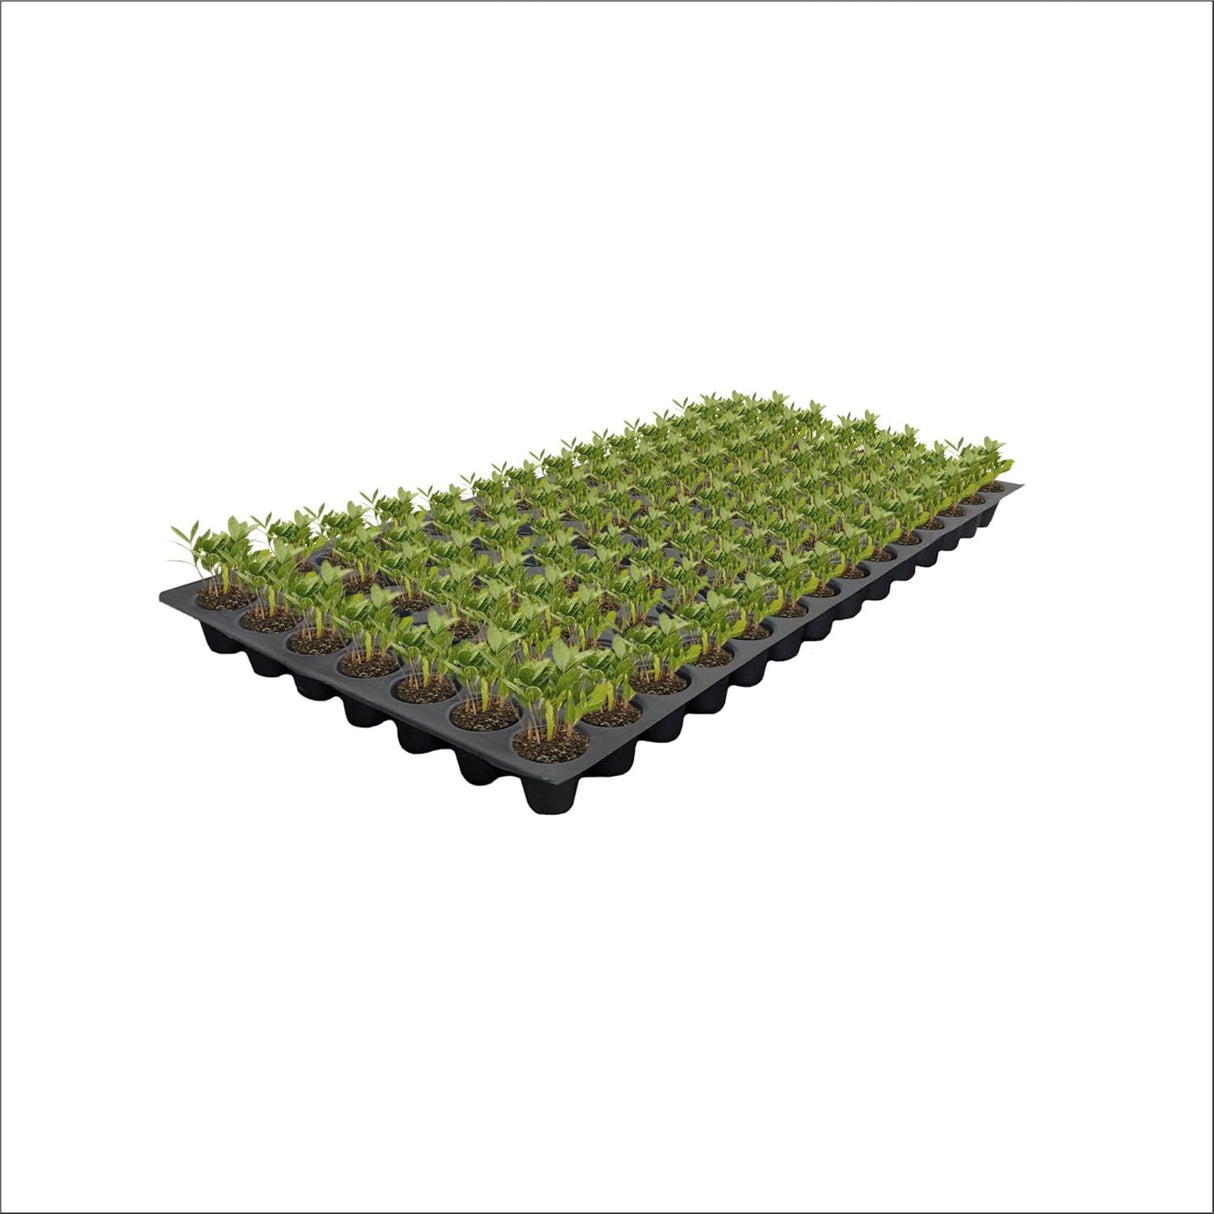 SINGHAL Seedling Tray - Pack of 15 (Black, 98 Holes) Germination Trays for Seedling, Nursery Trays for Plants, Reusable Plastic Trays for Garden Plantation, 98 Cavities Tray for Seeding